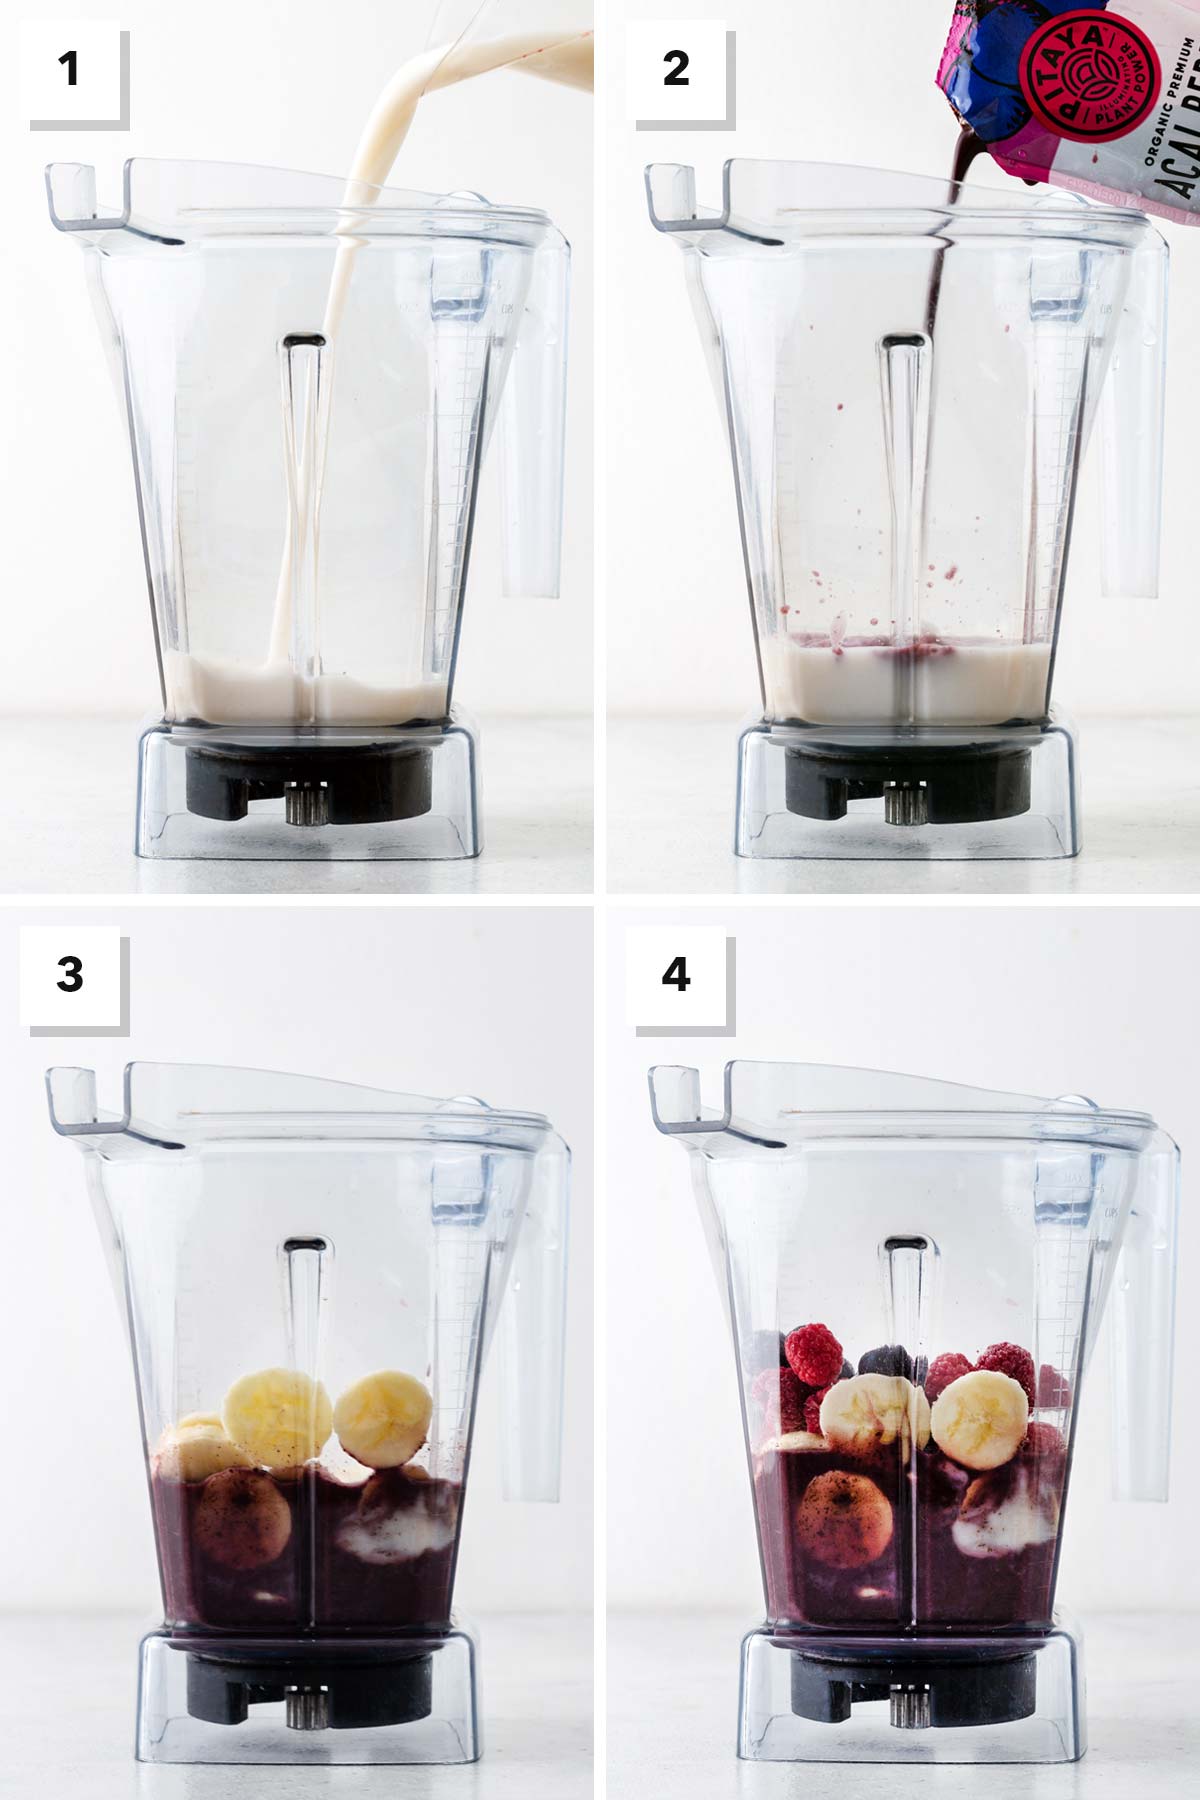 Steps for making an acai smoothie.